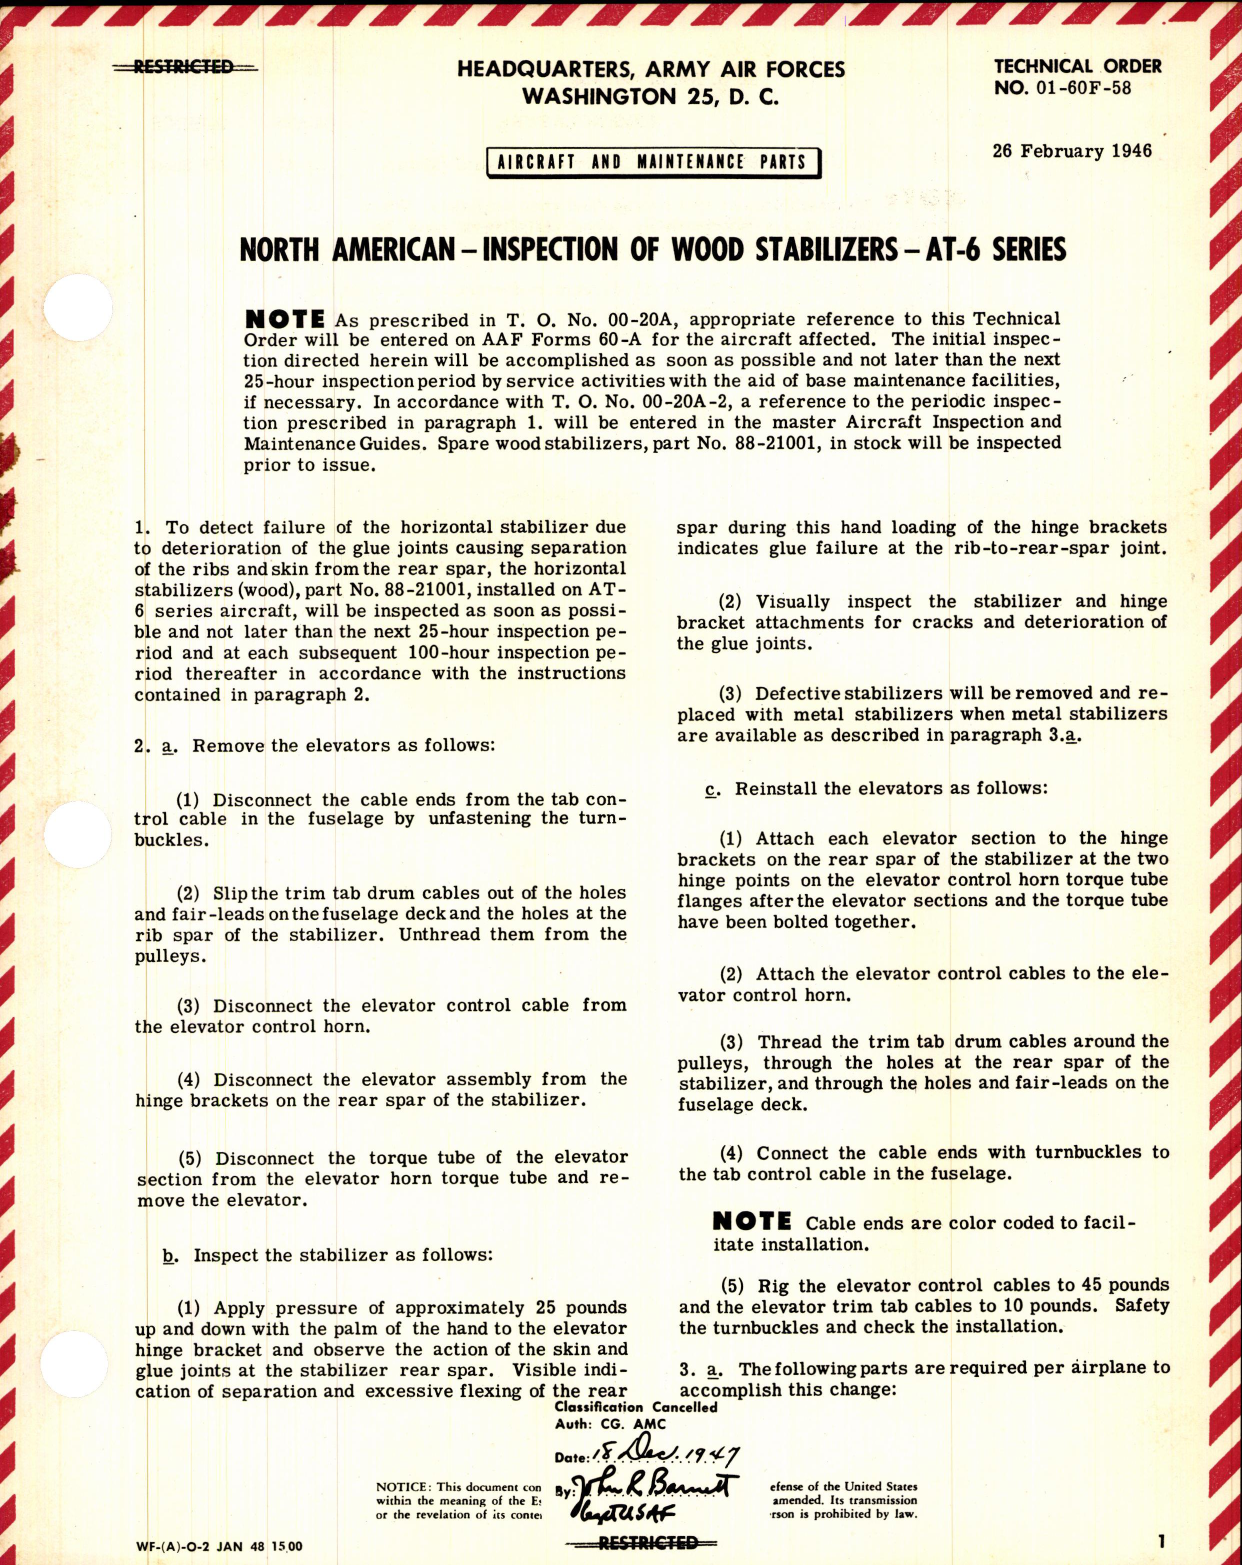 Sample page 1 from AirCorps Library document: Inspection of Wood Stabilizers for AT-6 Series